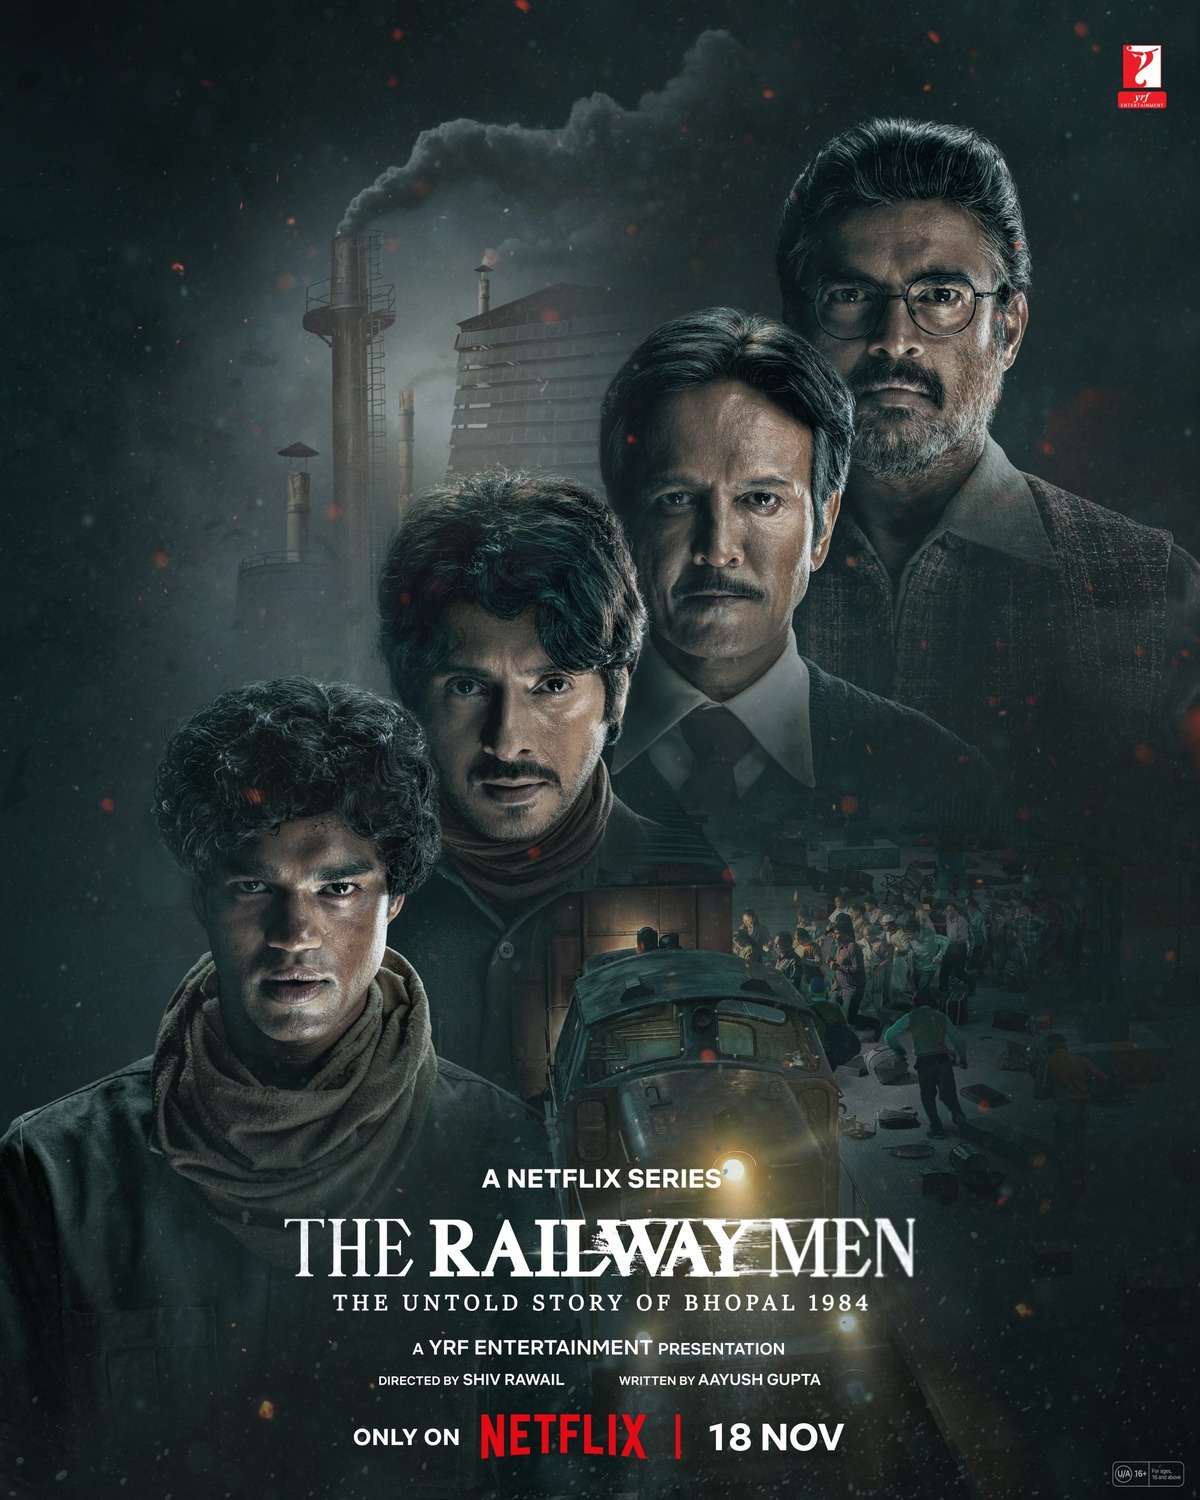 Extra Large TV Poster Image for The Railway Men: The Untold Story of Bhopal 1984 